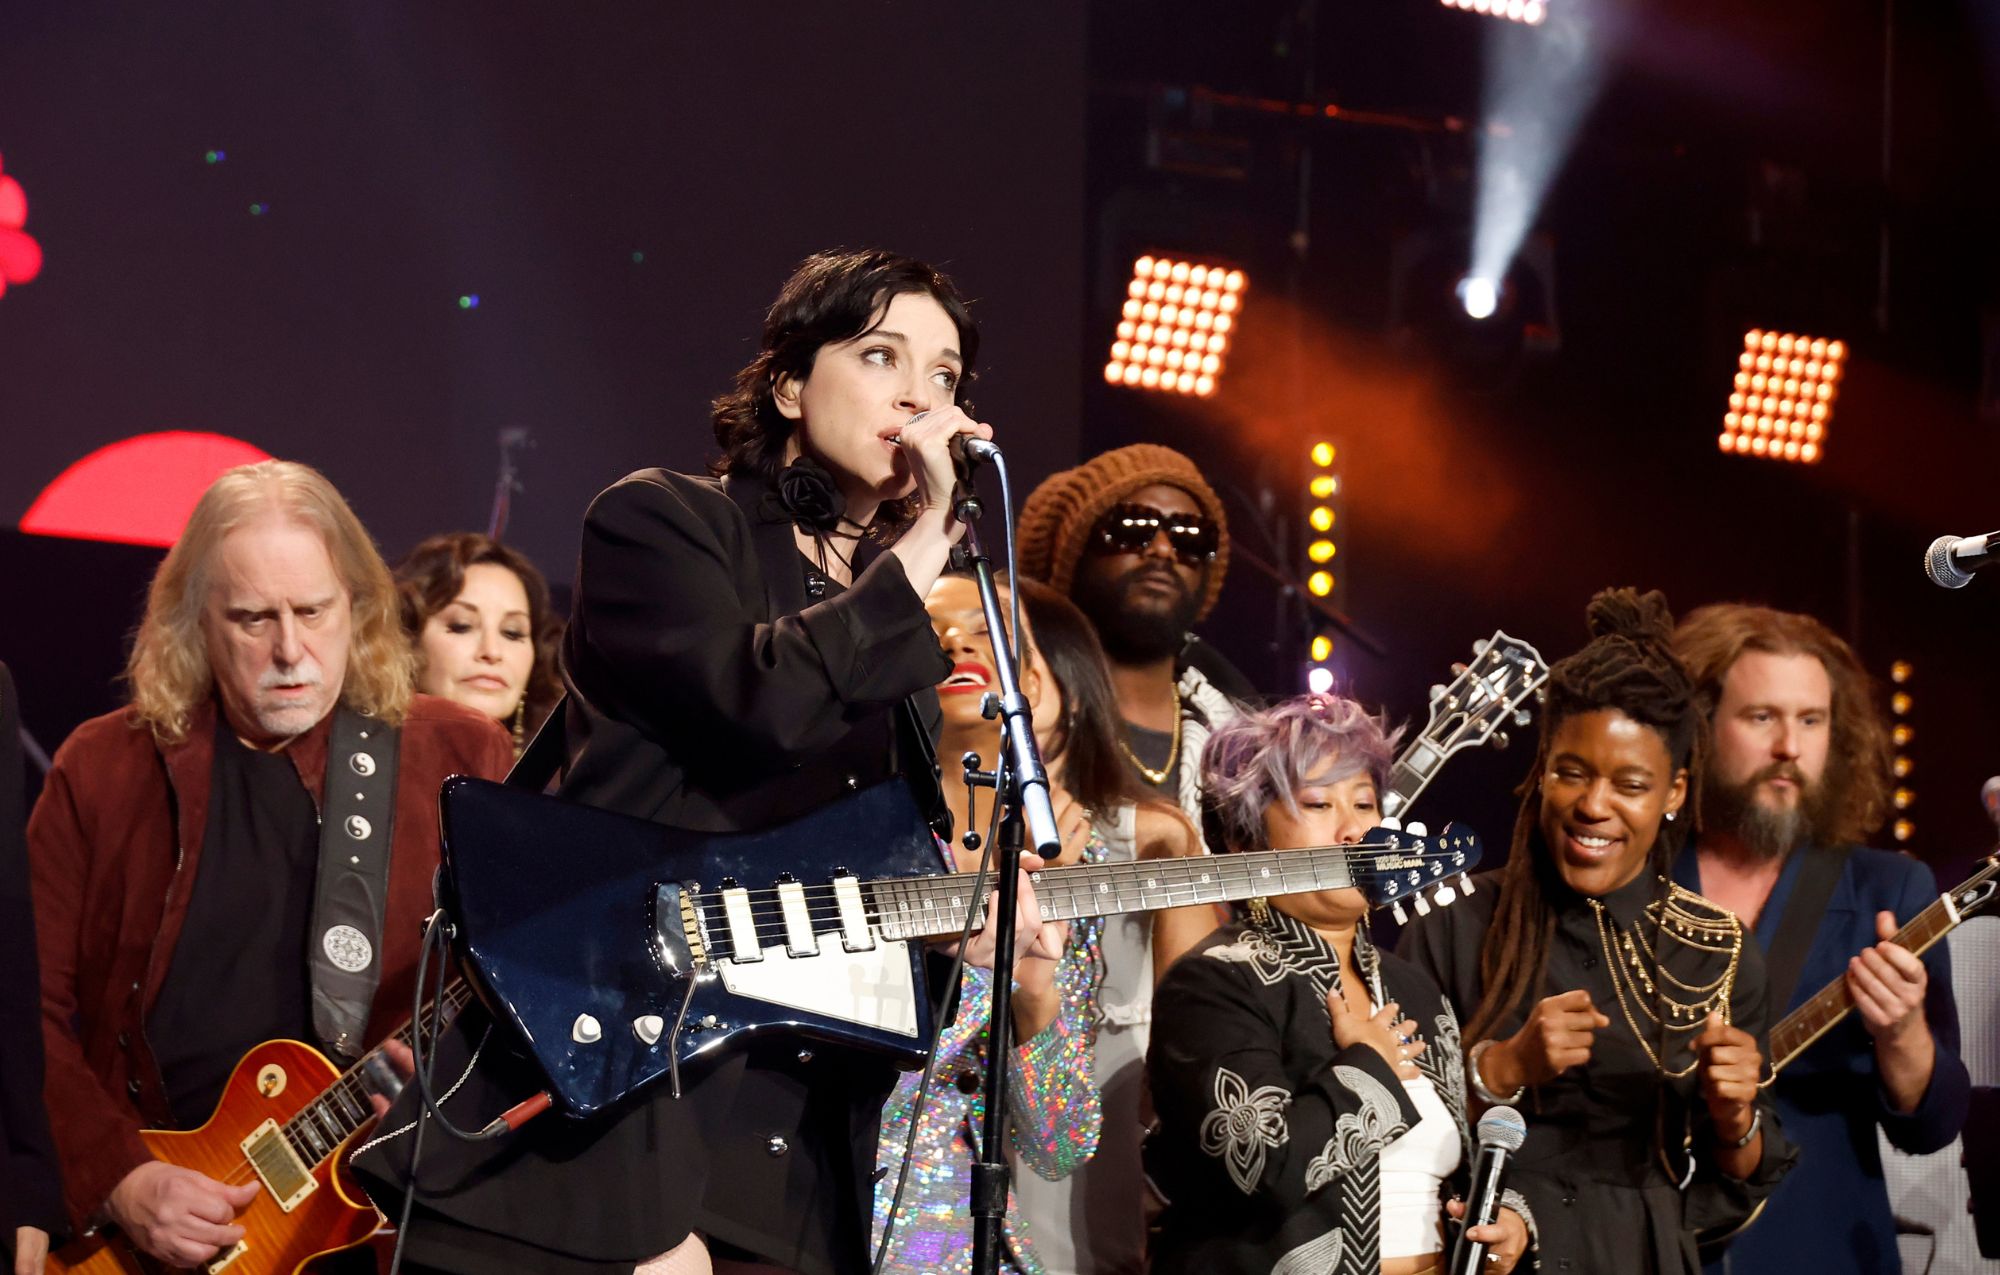 Watch St. Vincent cover David Bowie’s ‘Young Americans’ at Love Rocks gig